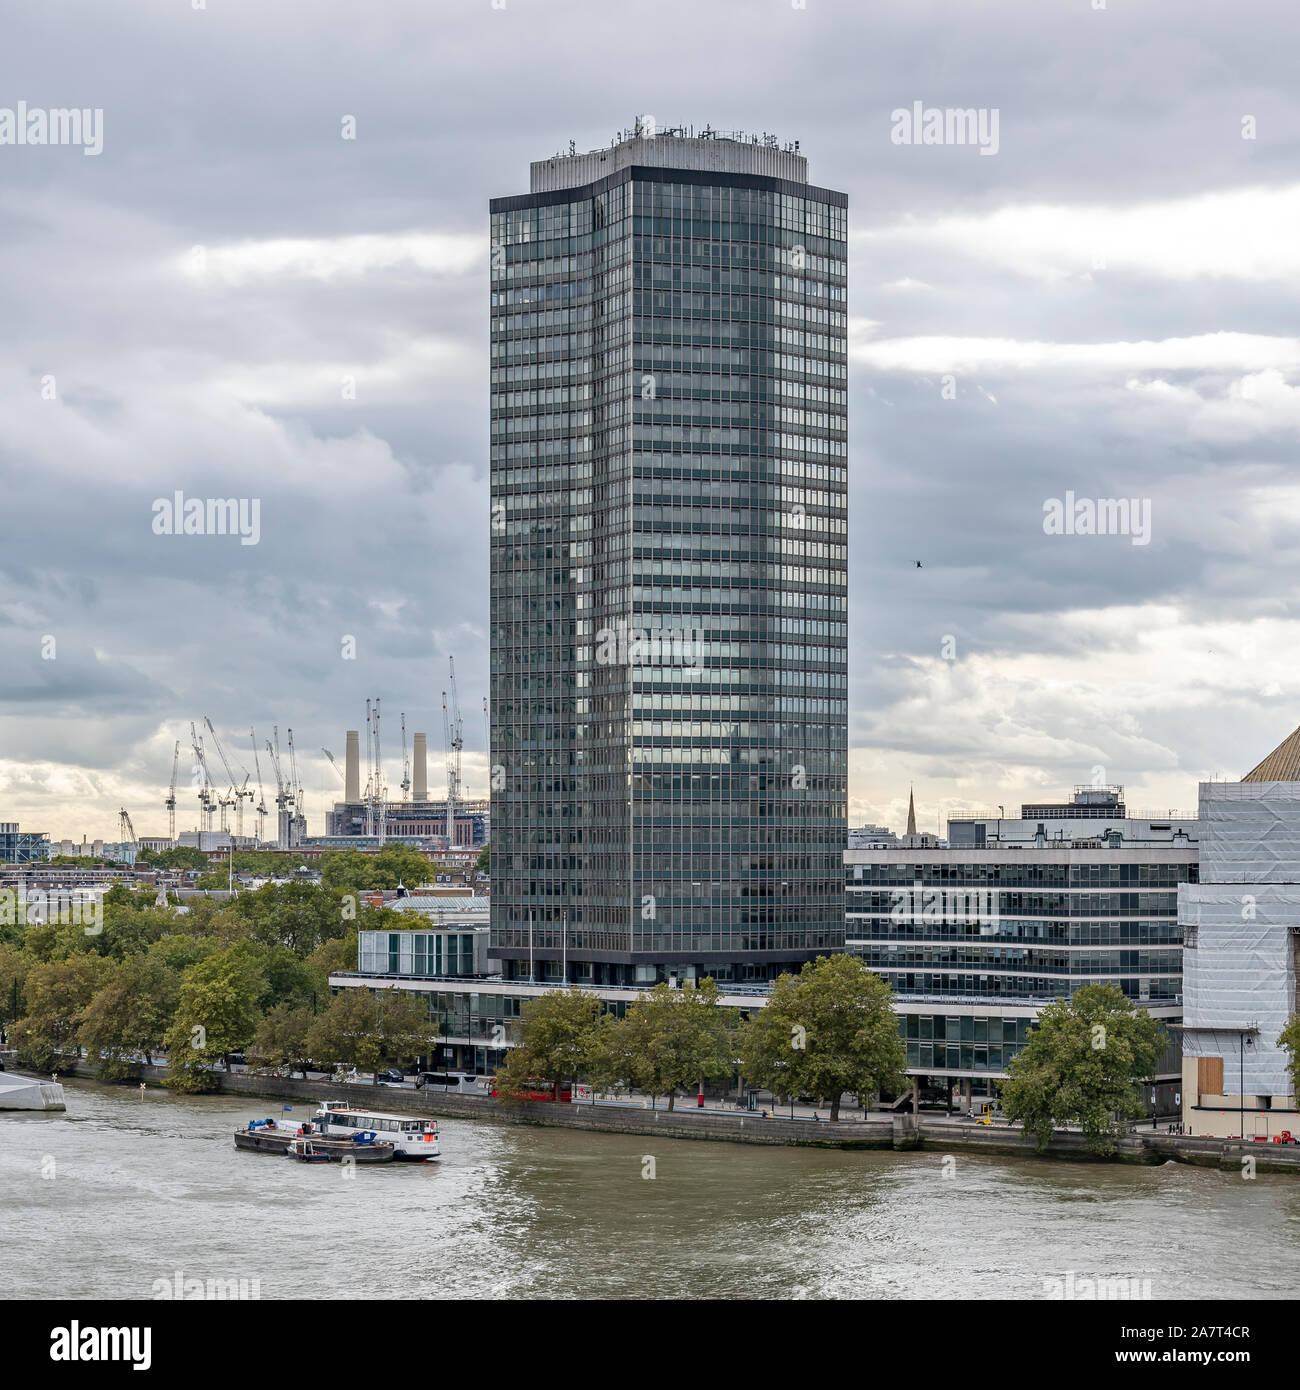 Milbank Tower, built in 1963 by Ronald Ward and Partners. Taken from across the Thames at the tower of the Garden Museum in Lambeth, London Stock Photo